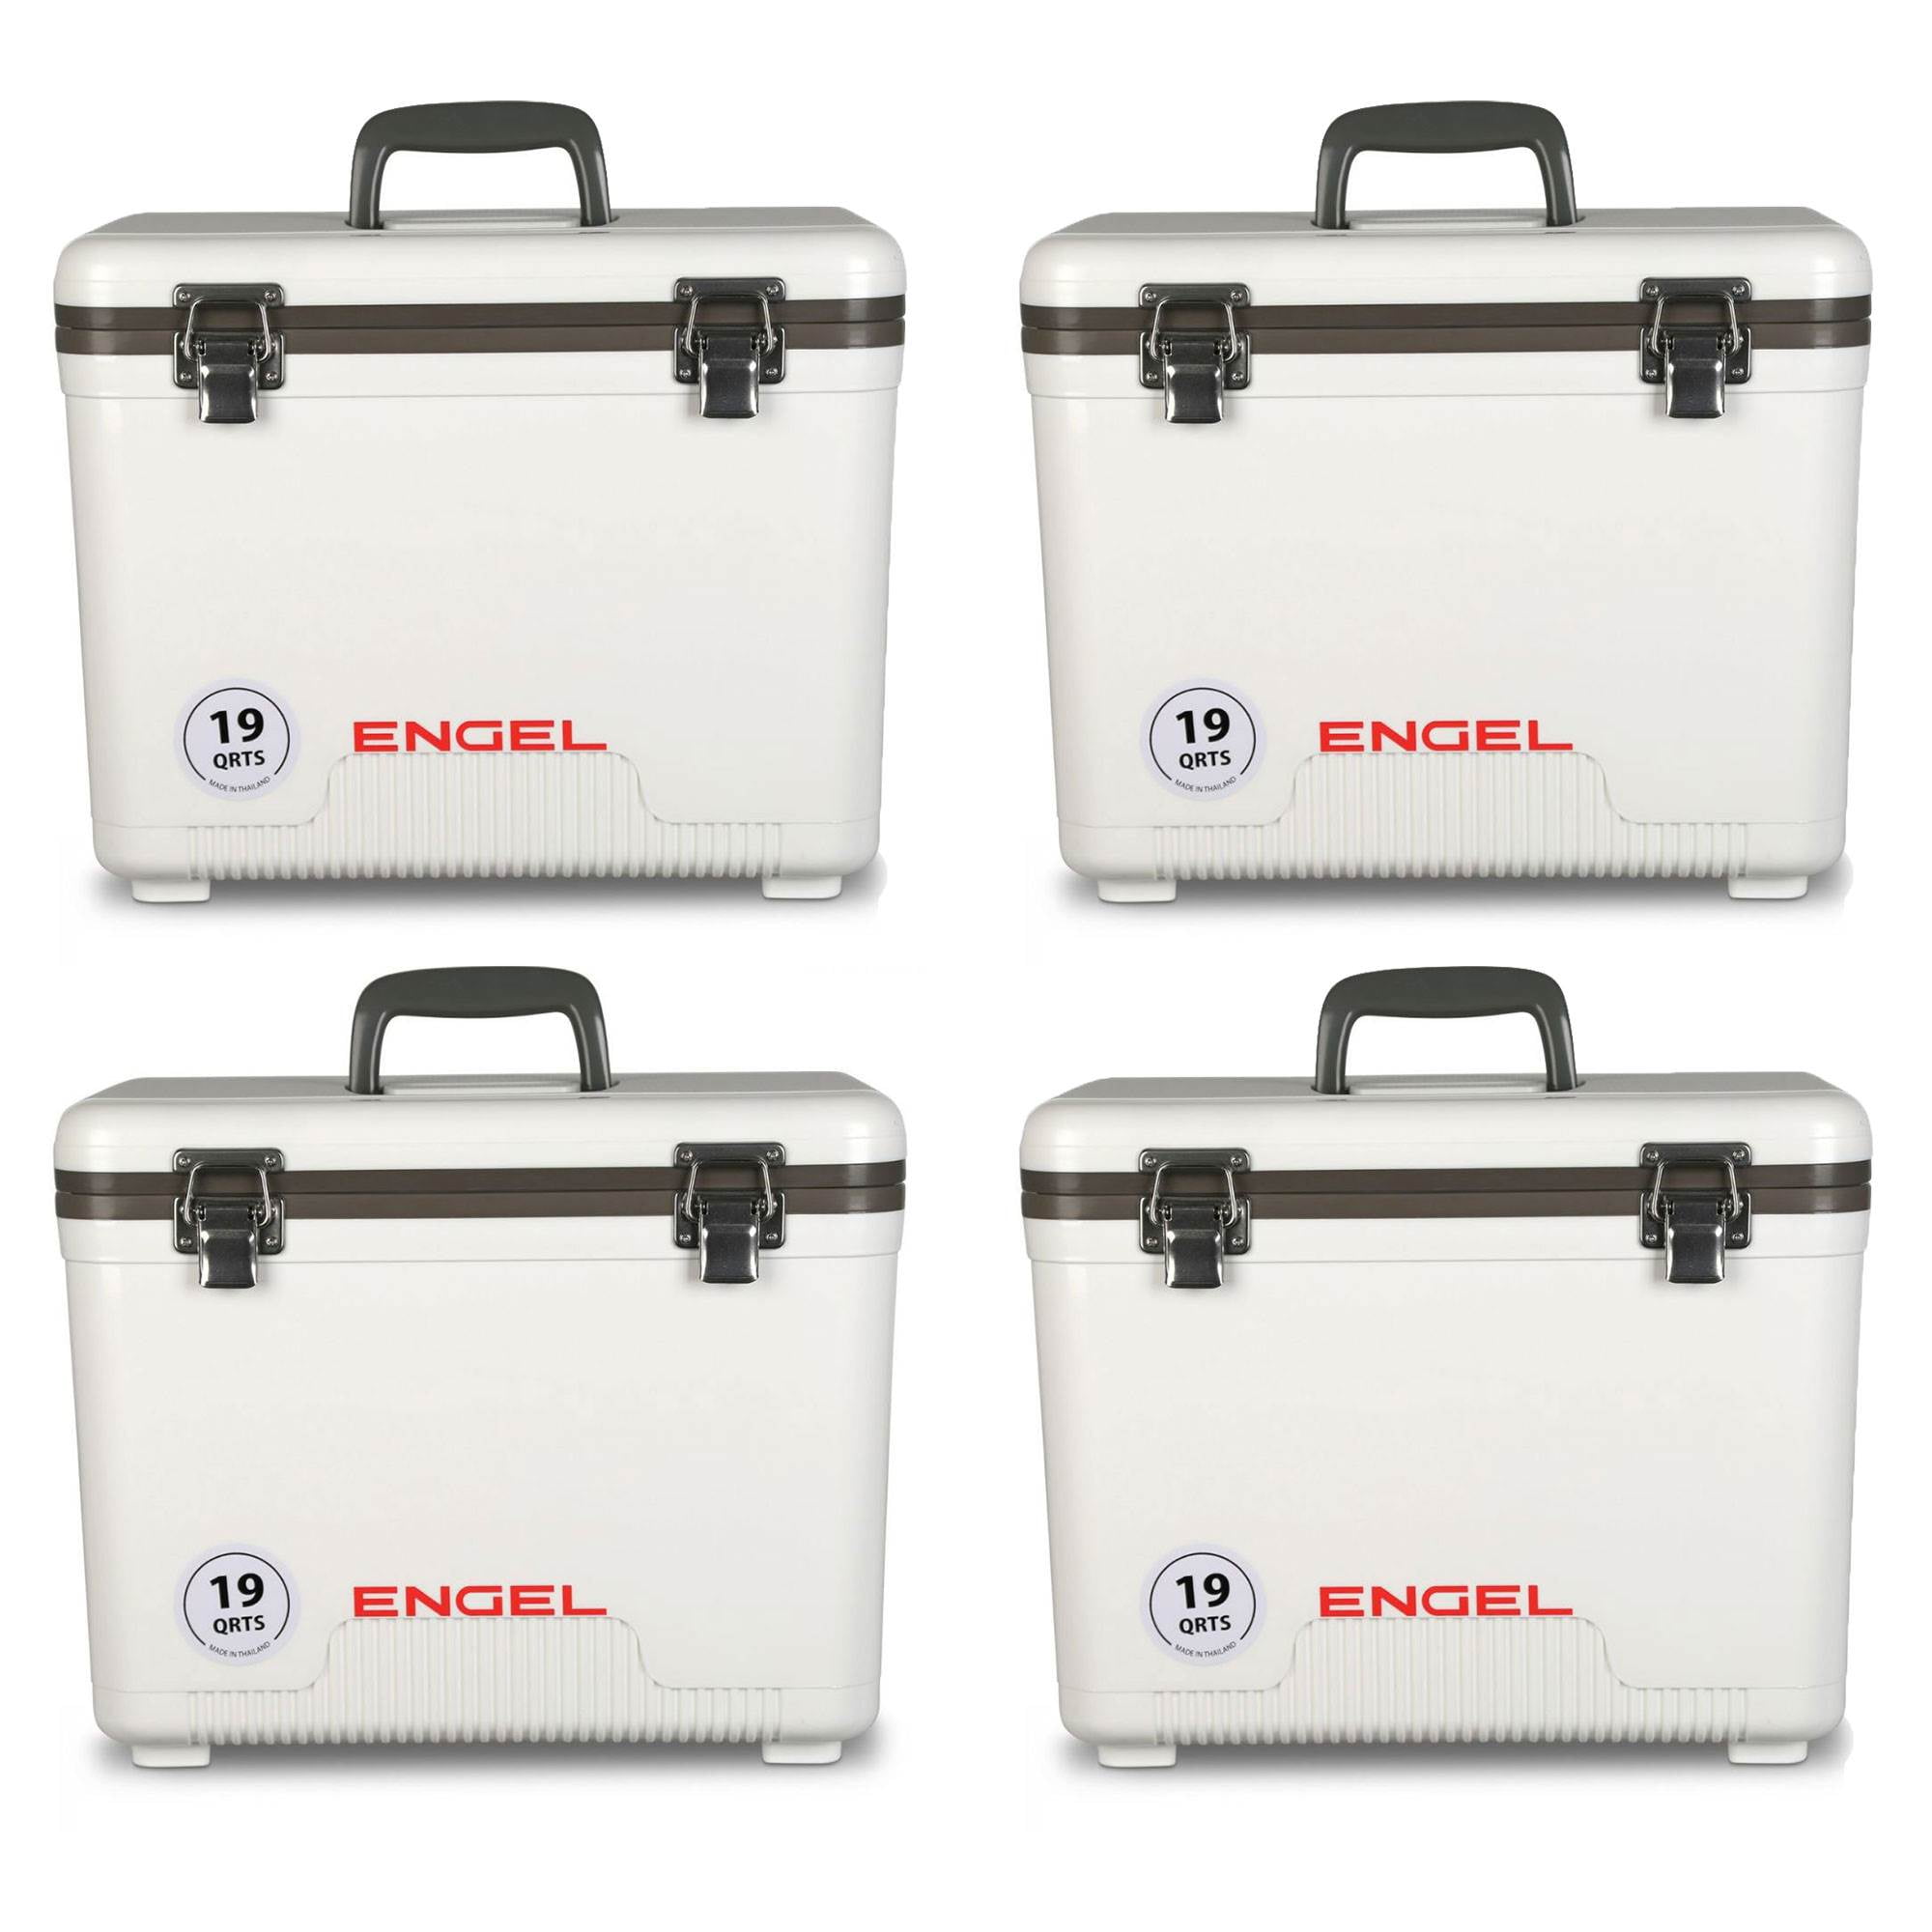 Engel 19 Quart Fishing Dry Box Ice Cooler with Shoulder Strap, White (4  Pack) 